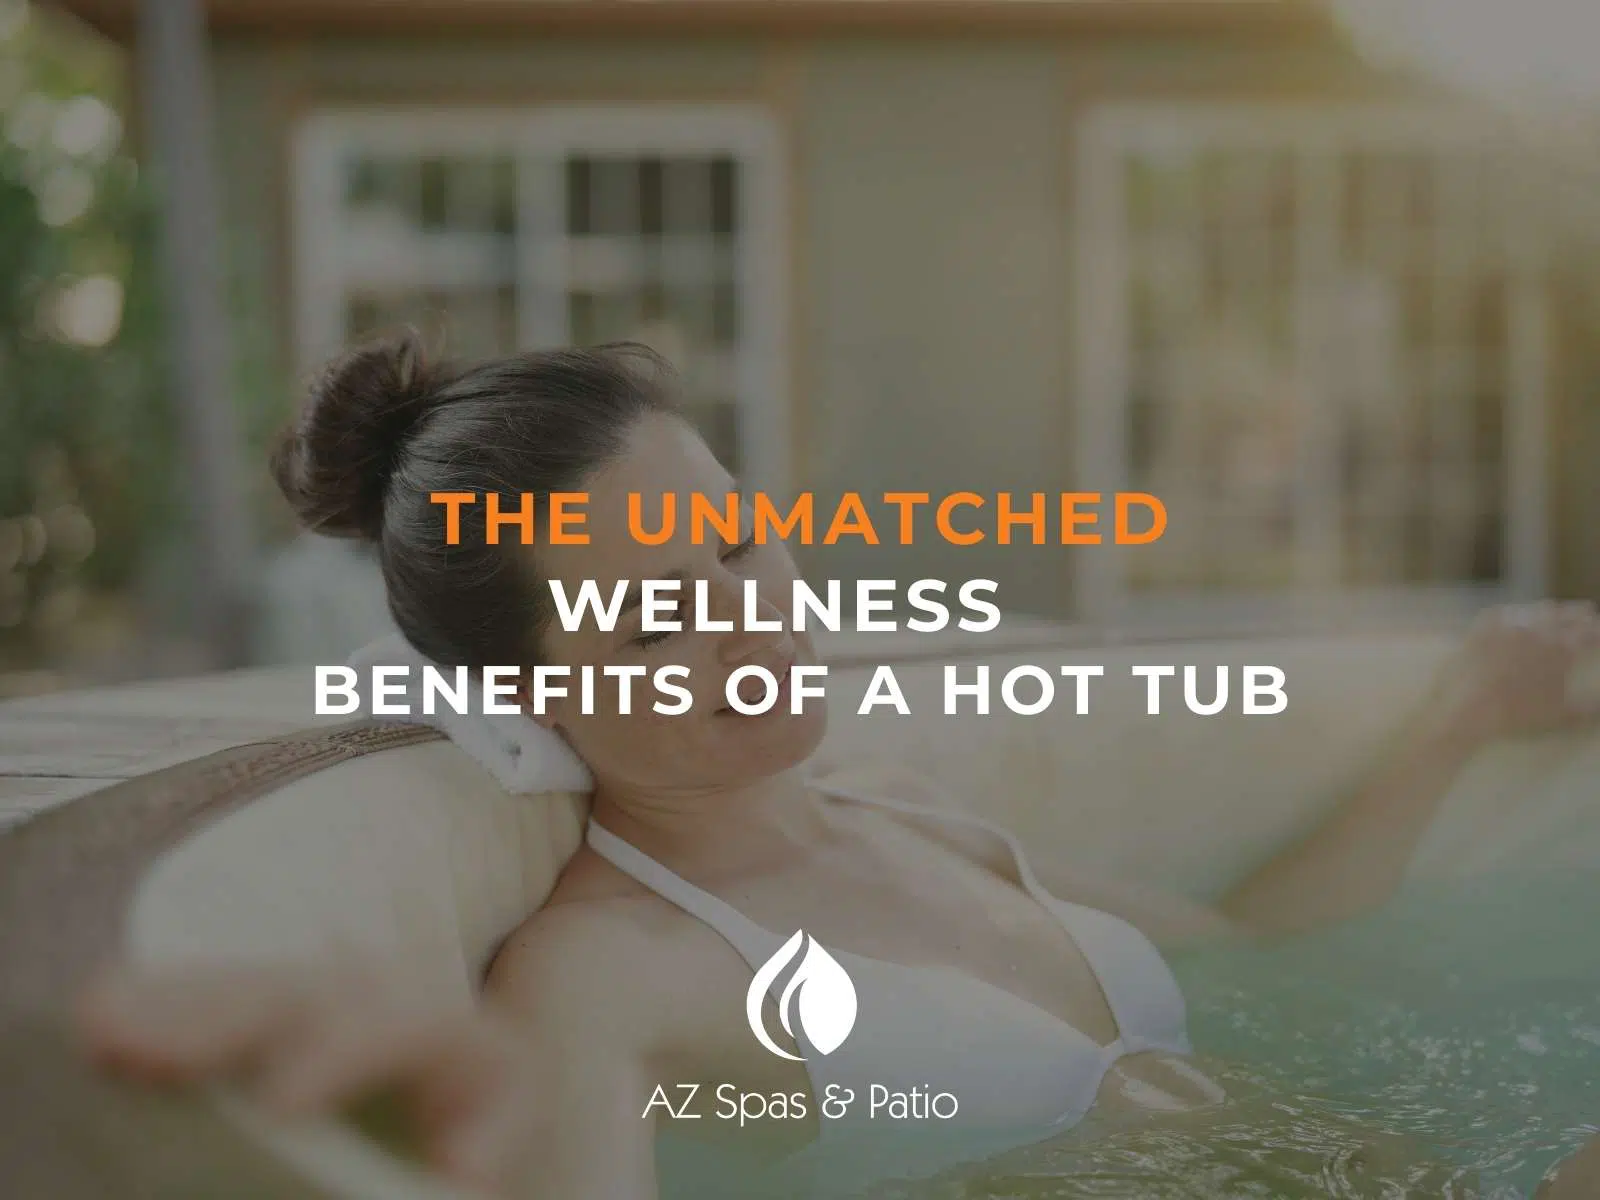 The Unmatched Wellness Benefits Of a Hot Tub